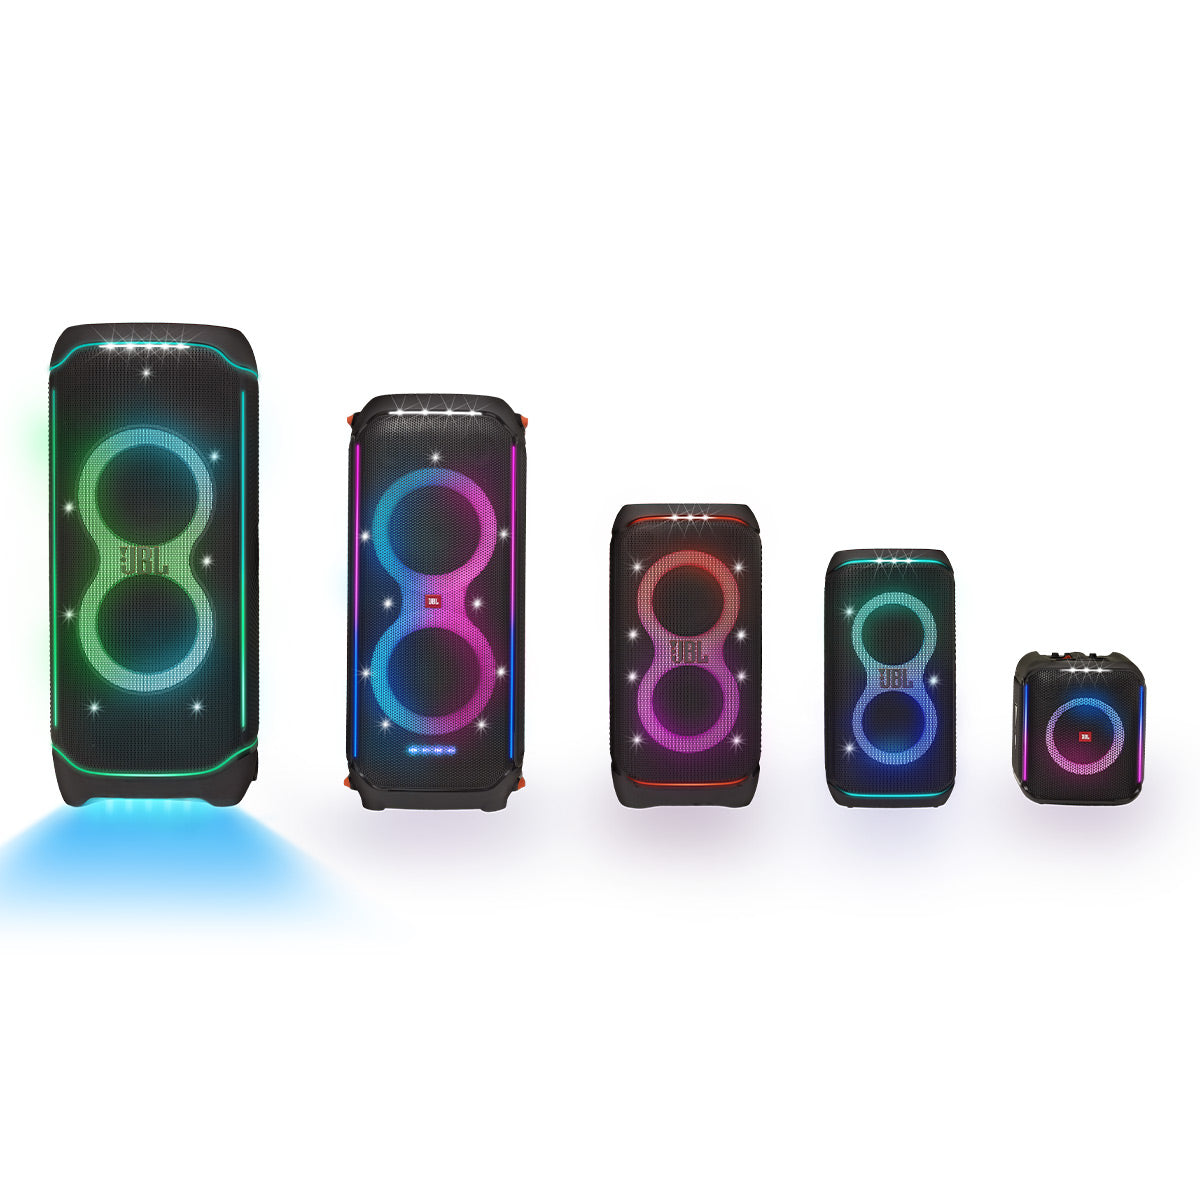 JBL PartyBox 710 Bluetooth Portable Party Speaker with Built-in Light and Splashproof Design